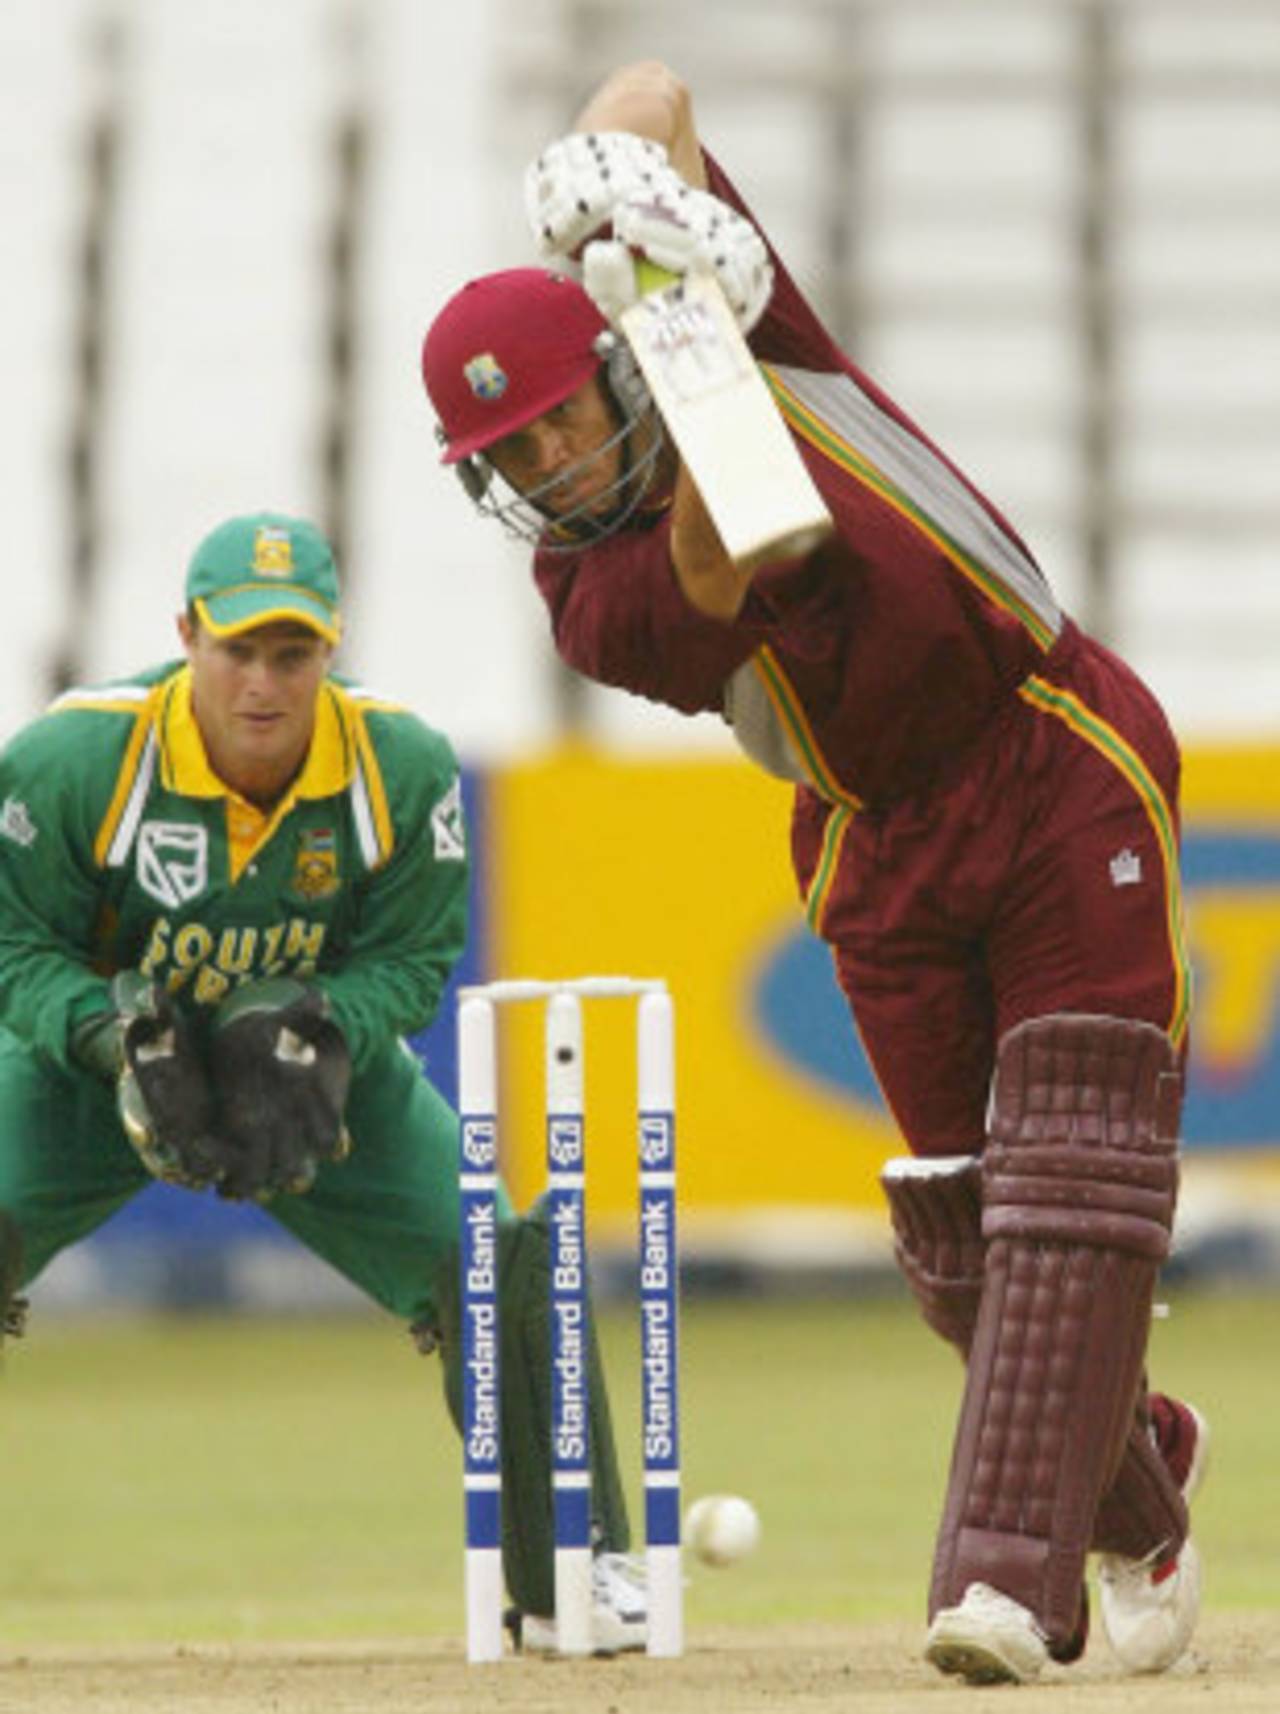 Ricardo Powell batting during his quickfire 49, South Africa v West Indies, 5th ODI, Johannesburg, February 4, 2004